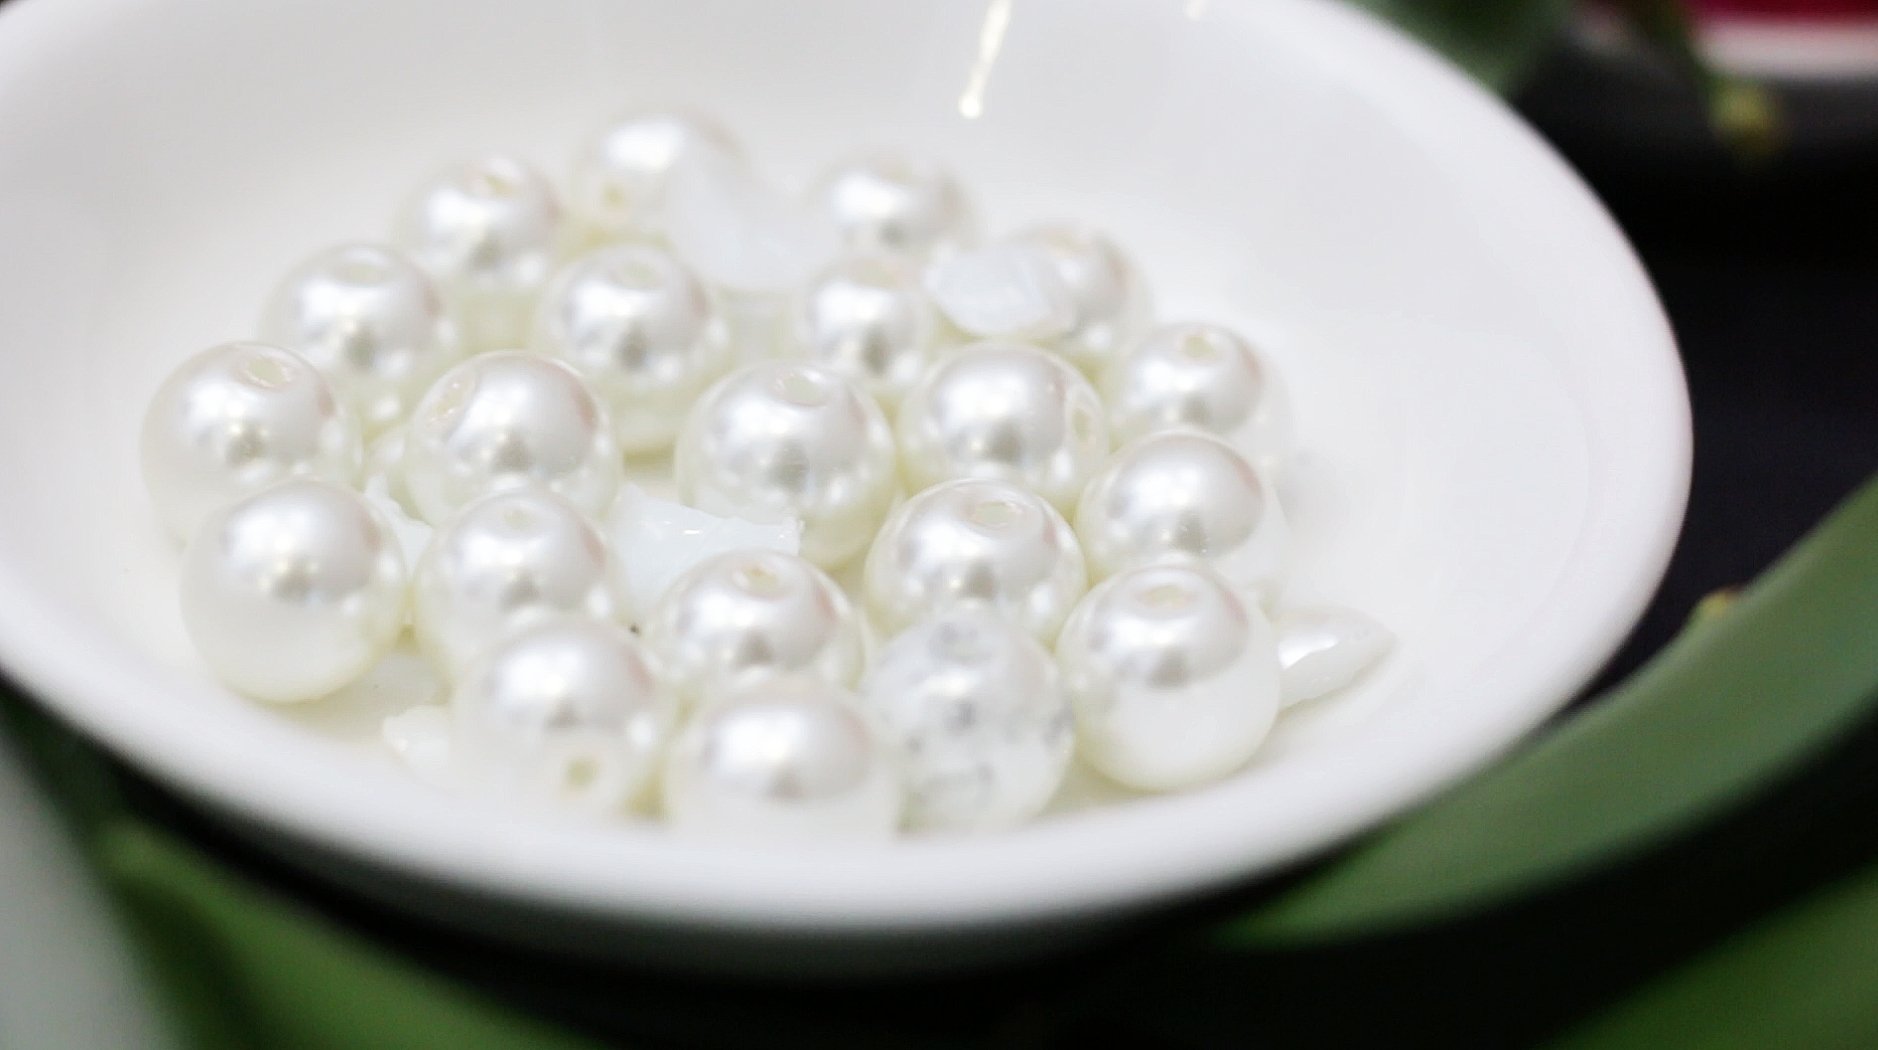 Pearl powder, how to use it? : r/VietNam